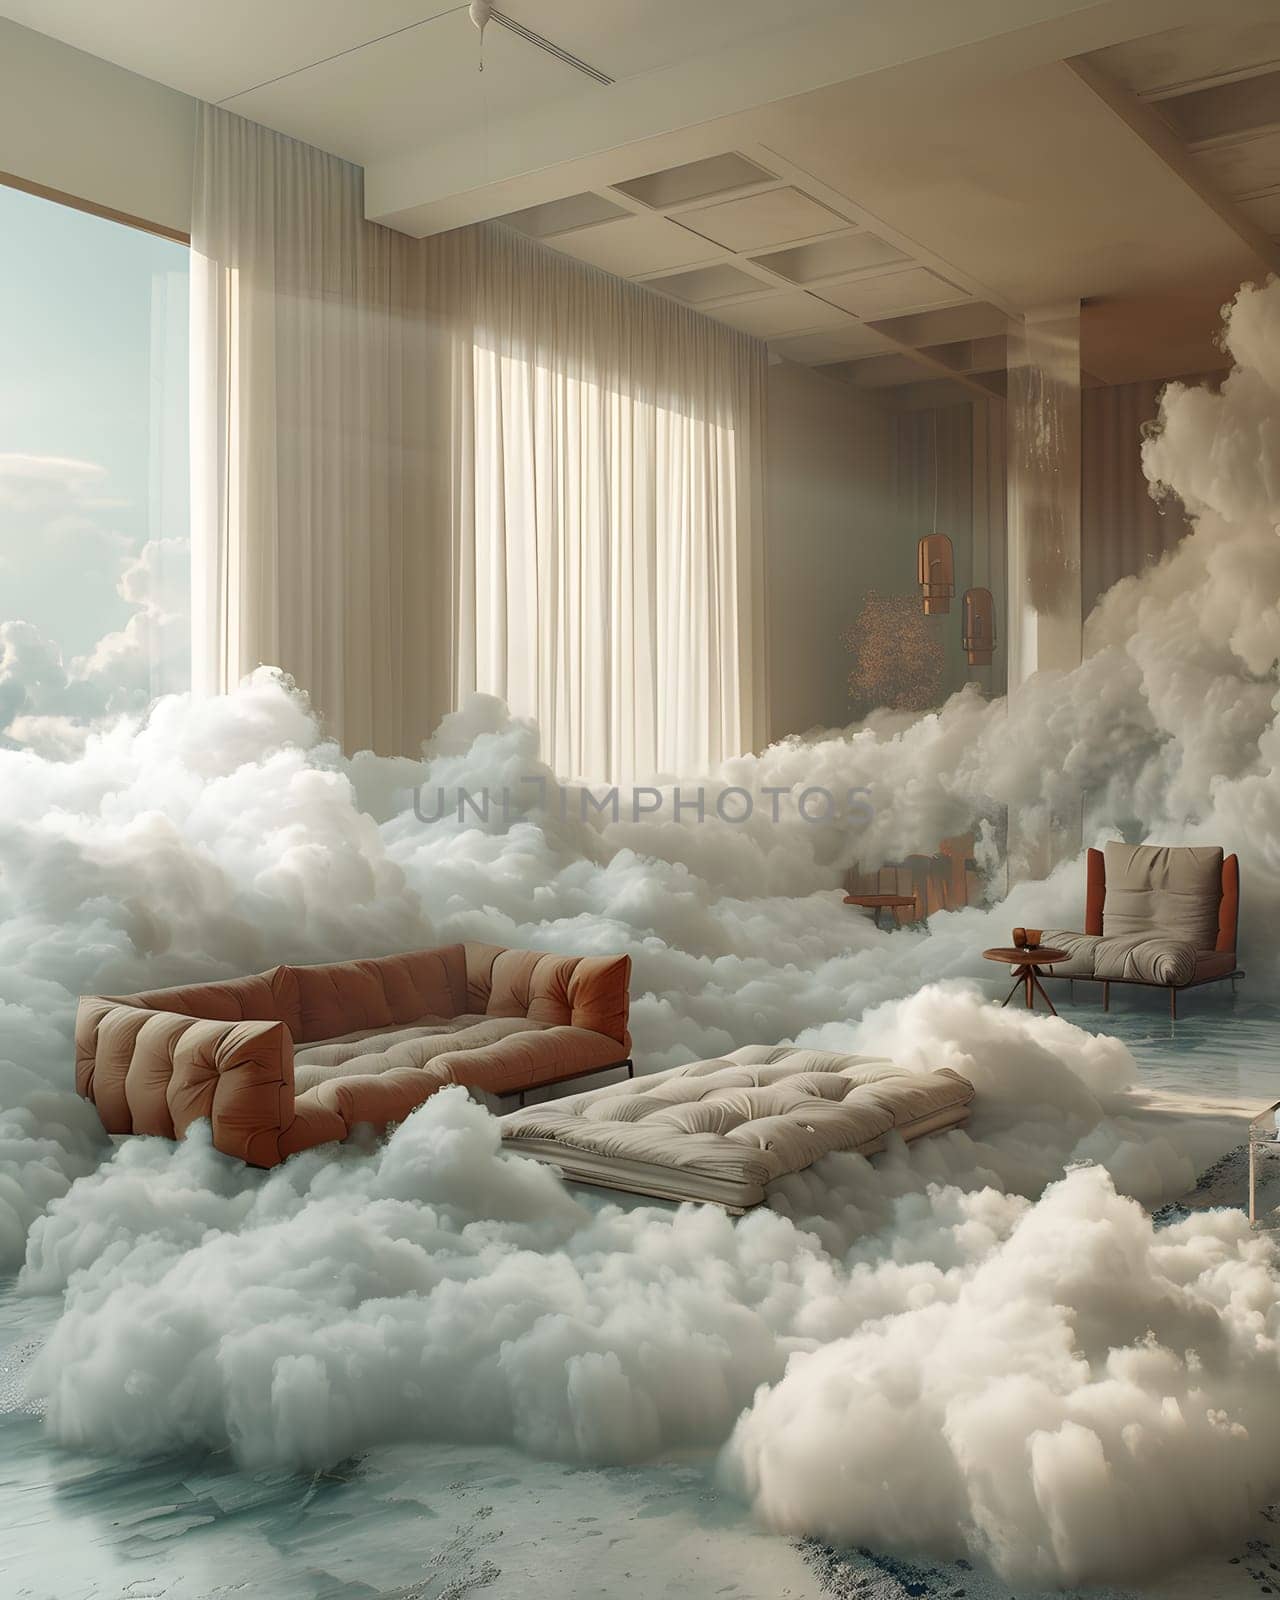 A living room with a couch and chairs surrounded by clouds, creating a Geological phenomenon. The flooring is made of wood, and the ceiling is like an art piece resembling a Wind wave event